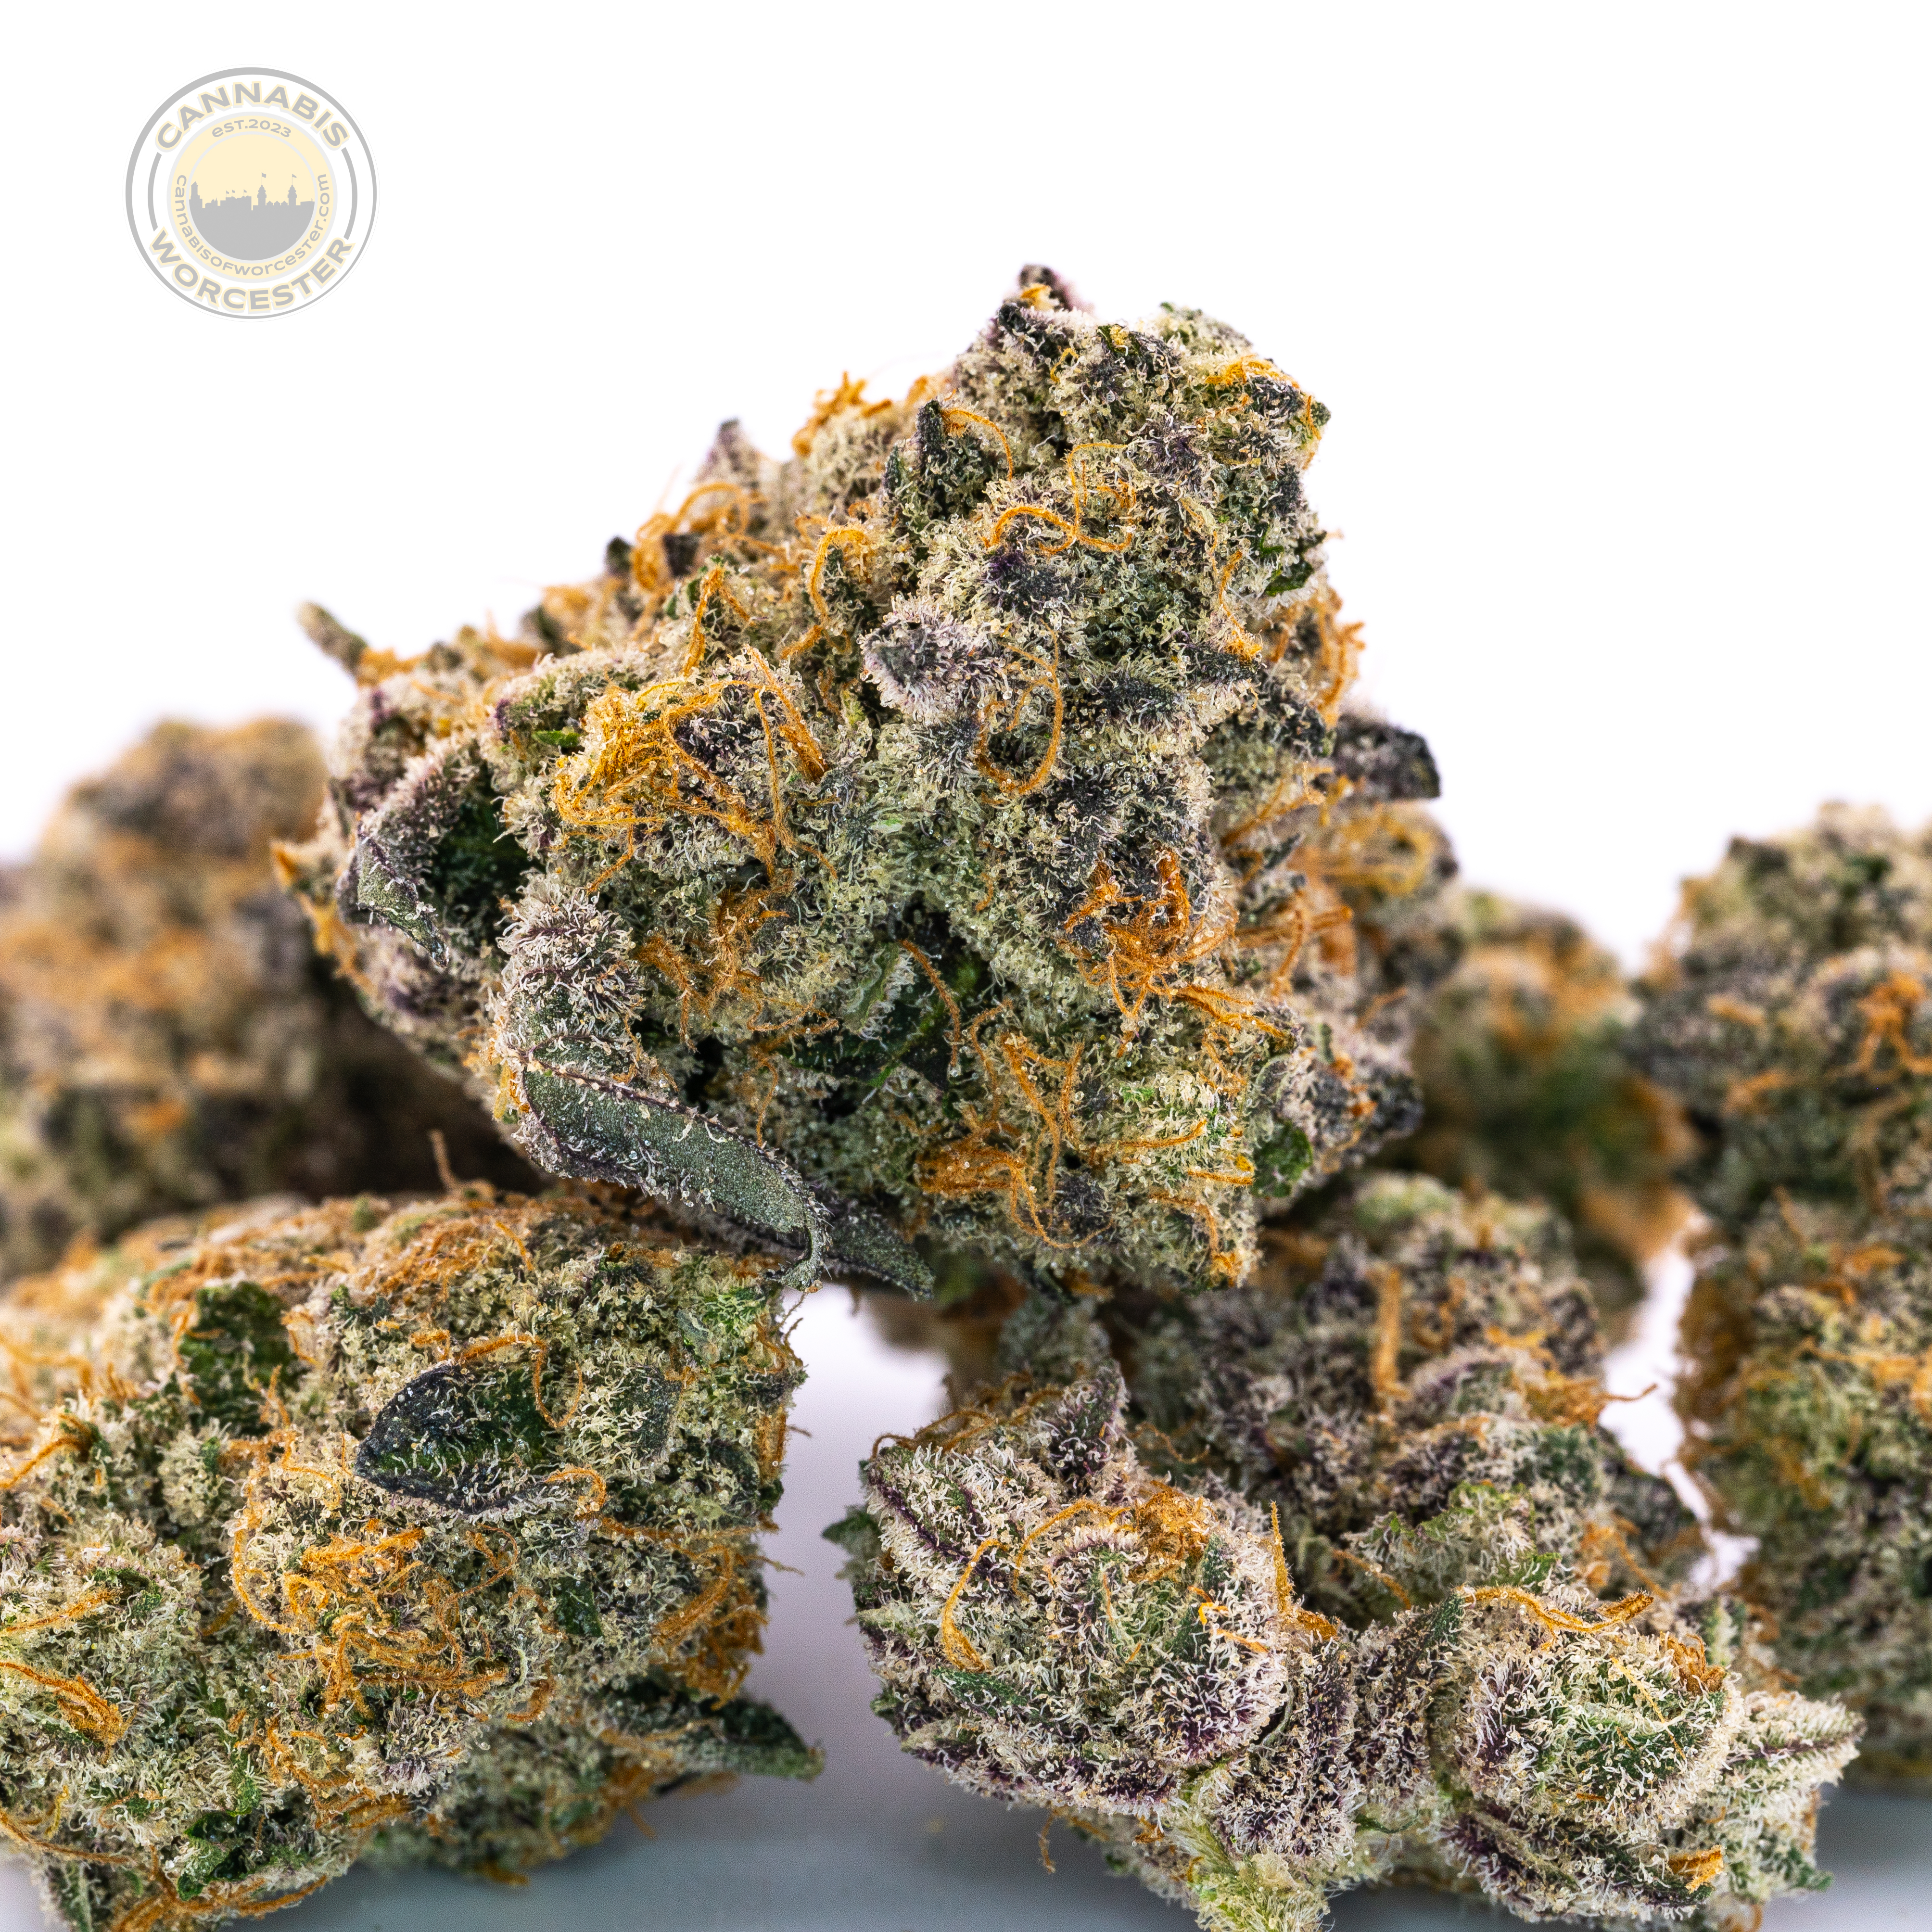 CIC- coffee icecream cake from terrapin has a dank sweet cakeish smell and  taste with lemon/pine in the background pretty decent cake strain it's  smooth and sweet with a funk relaxing indica :